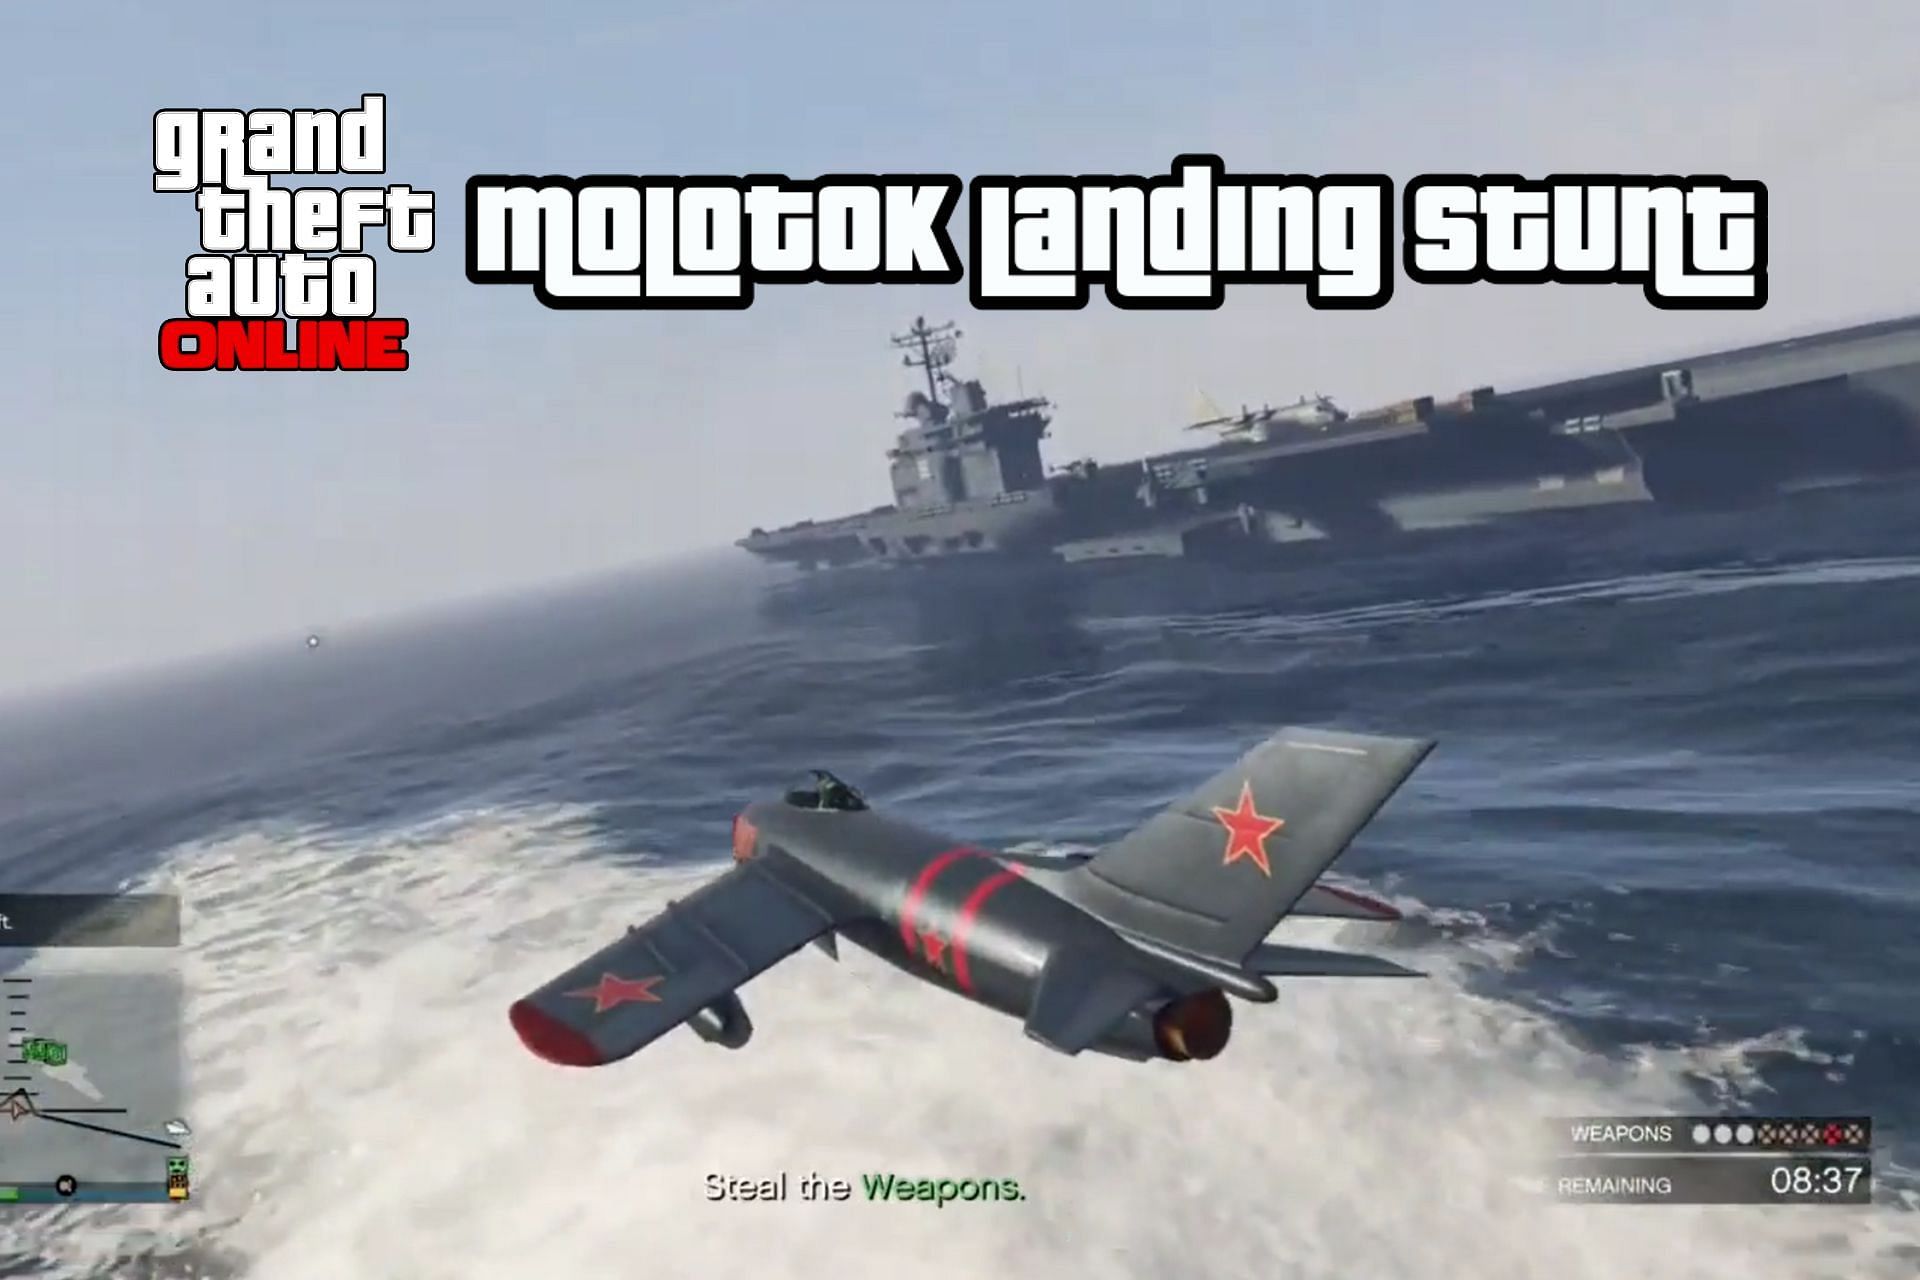 GTA Online player performed an incredible stunt with the Molotok (Image via Reddit)